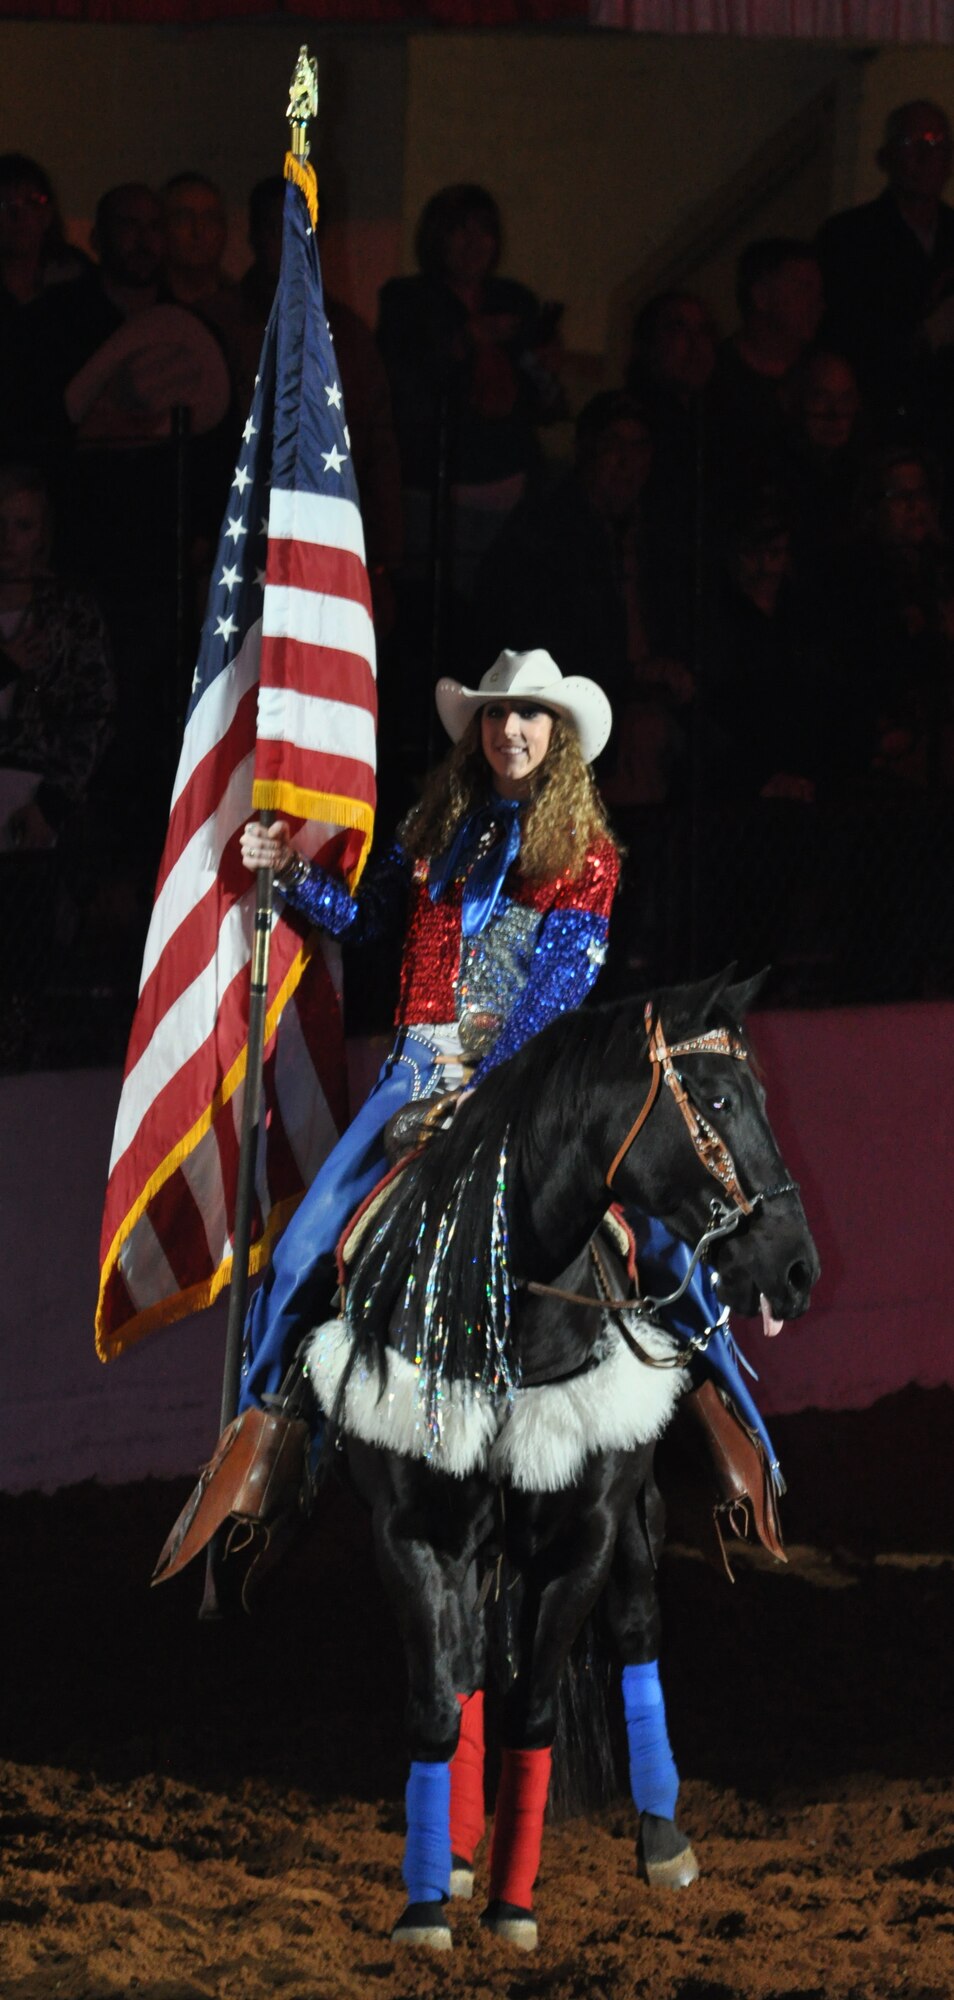 It was an exciting day at Fort Worth Stock Show and Rodeo's Military Appreciation Day. Member of the 301st Fighter Wing rode in the rodeo's grand entry prior to enjoying the sights and sounds of this historic annual event. (U.S. Air Force photo/Master Sgt. Julie Briden-Garcia)